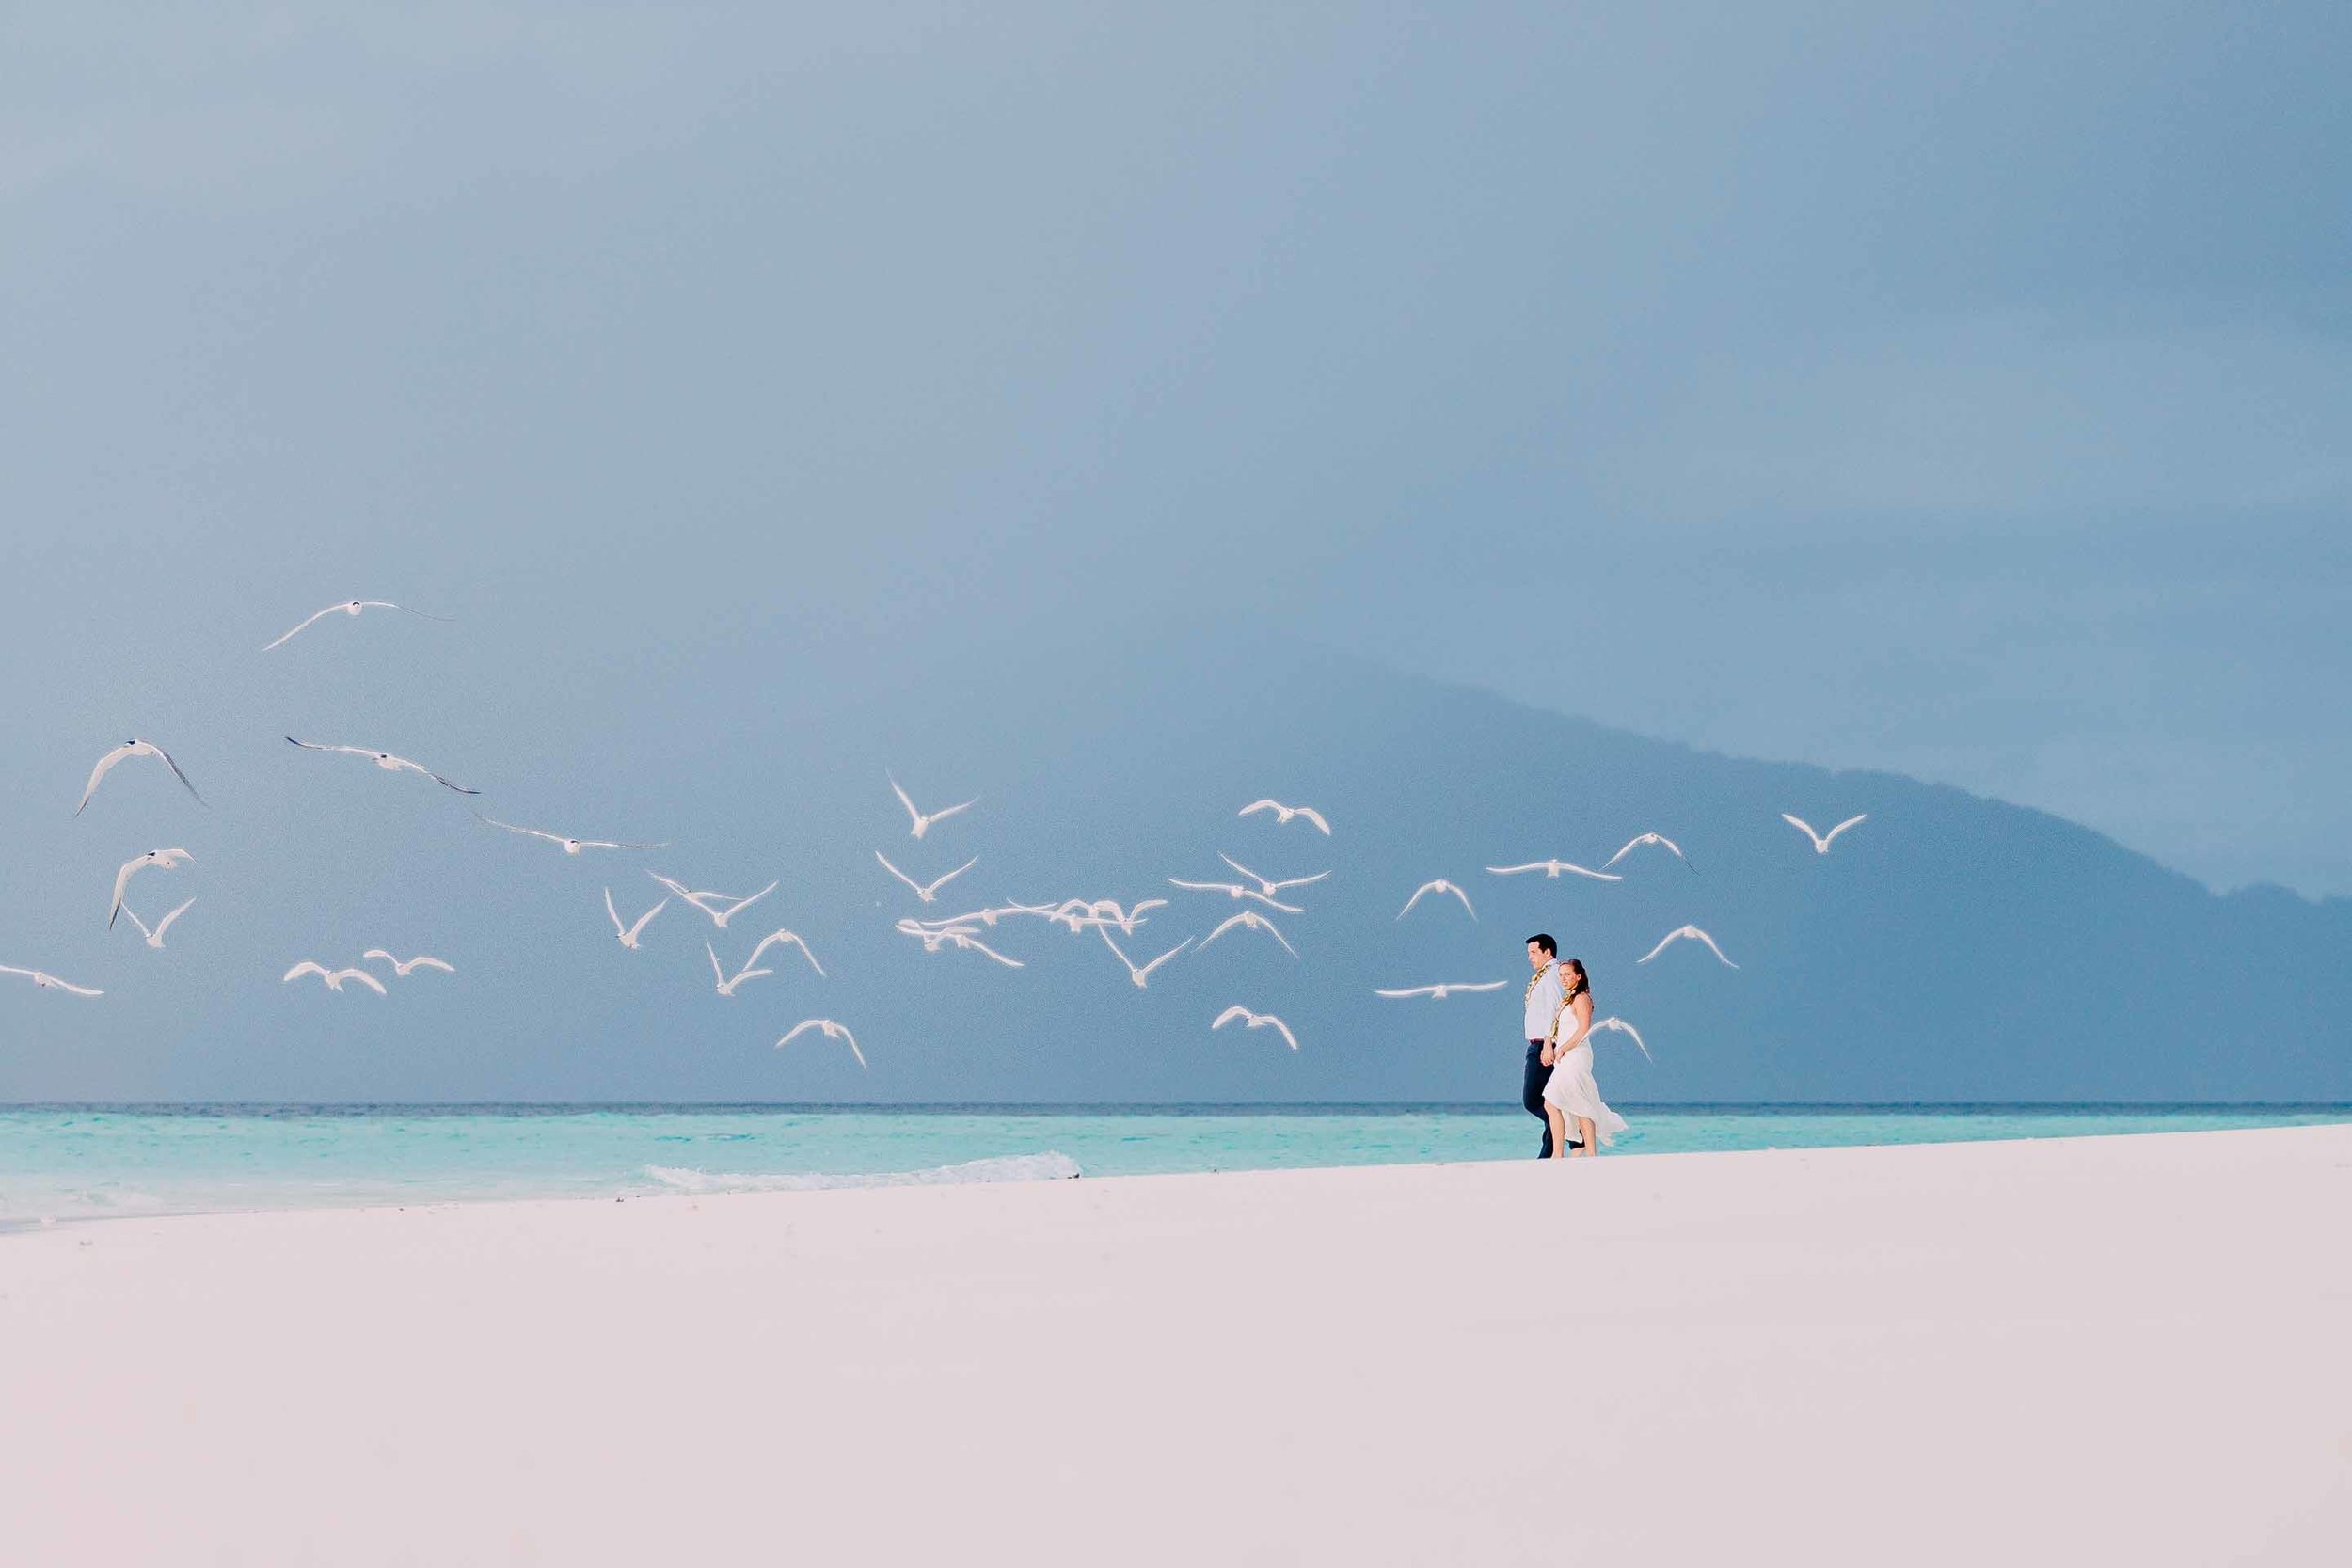 Flock of white gulls take flight as the bride and groom explore their own piece of paradise where they got married. 